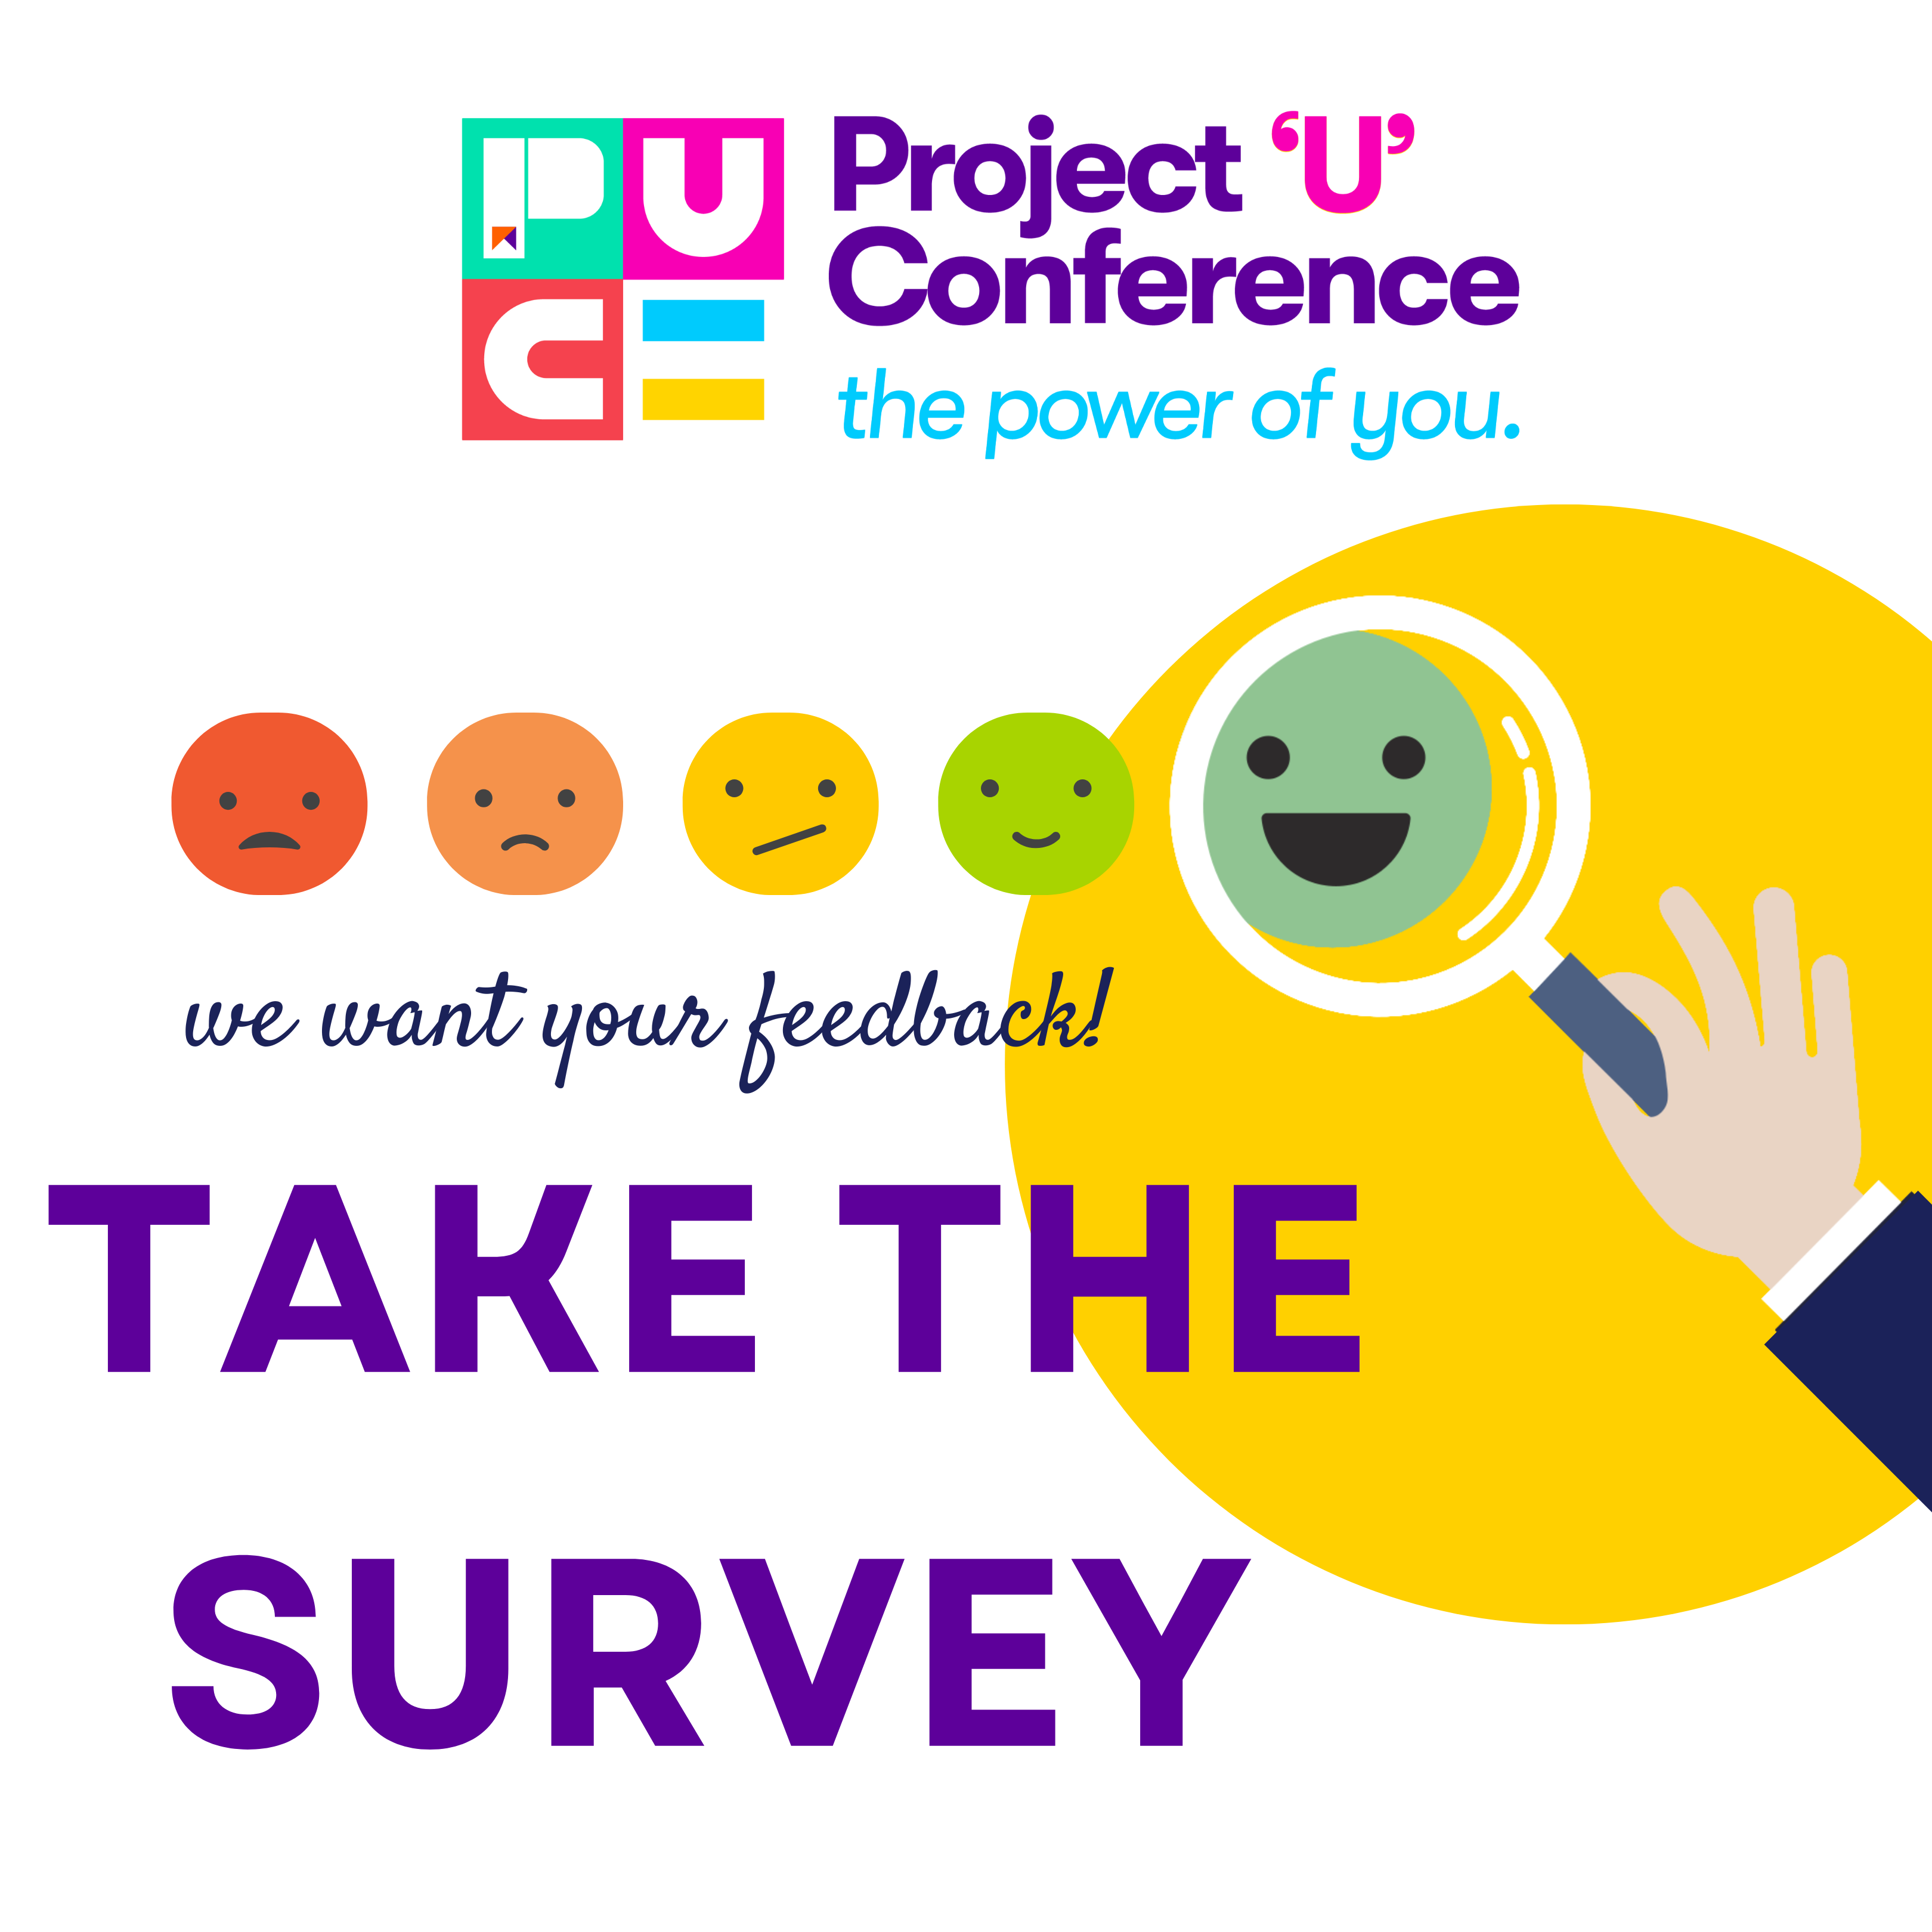 Tell us what you think of PROJECT U CONFERENCE 2022